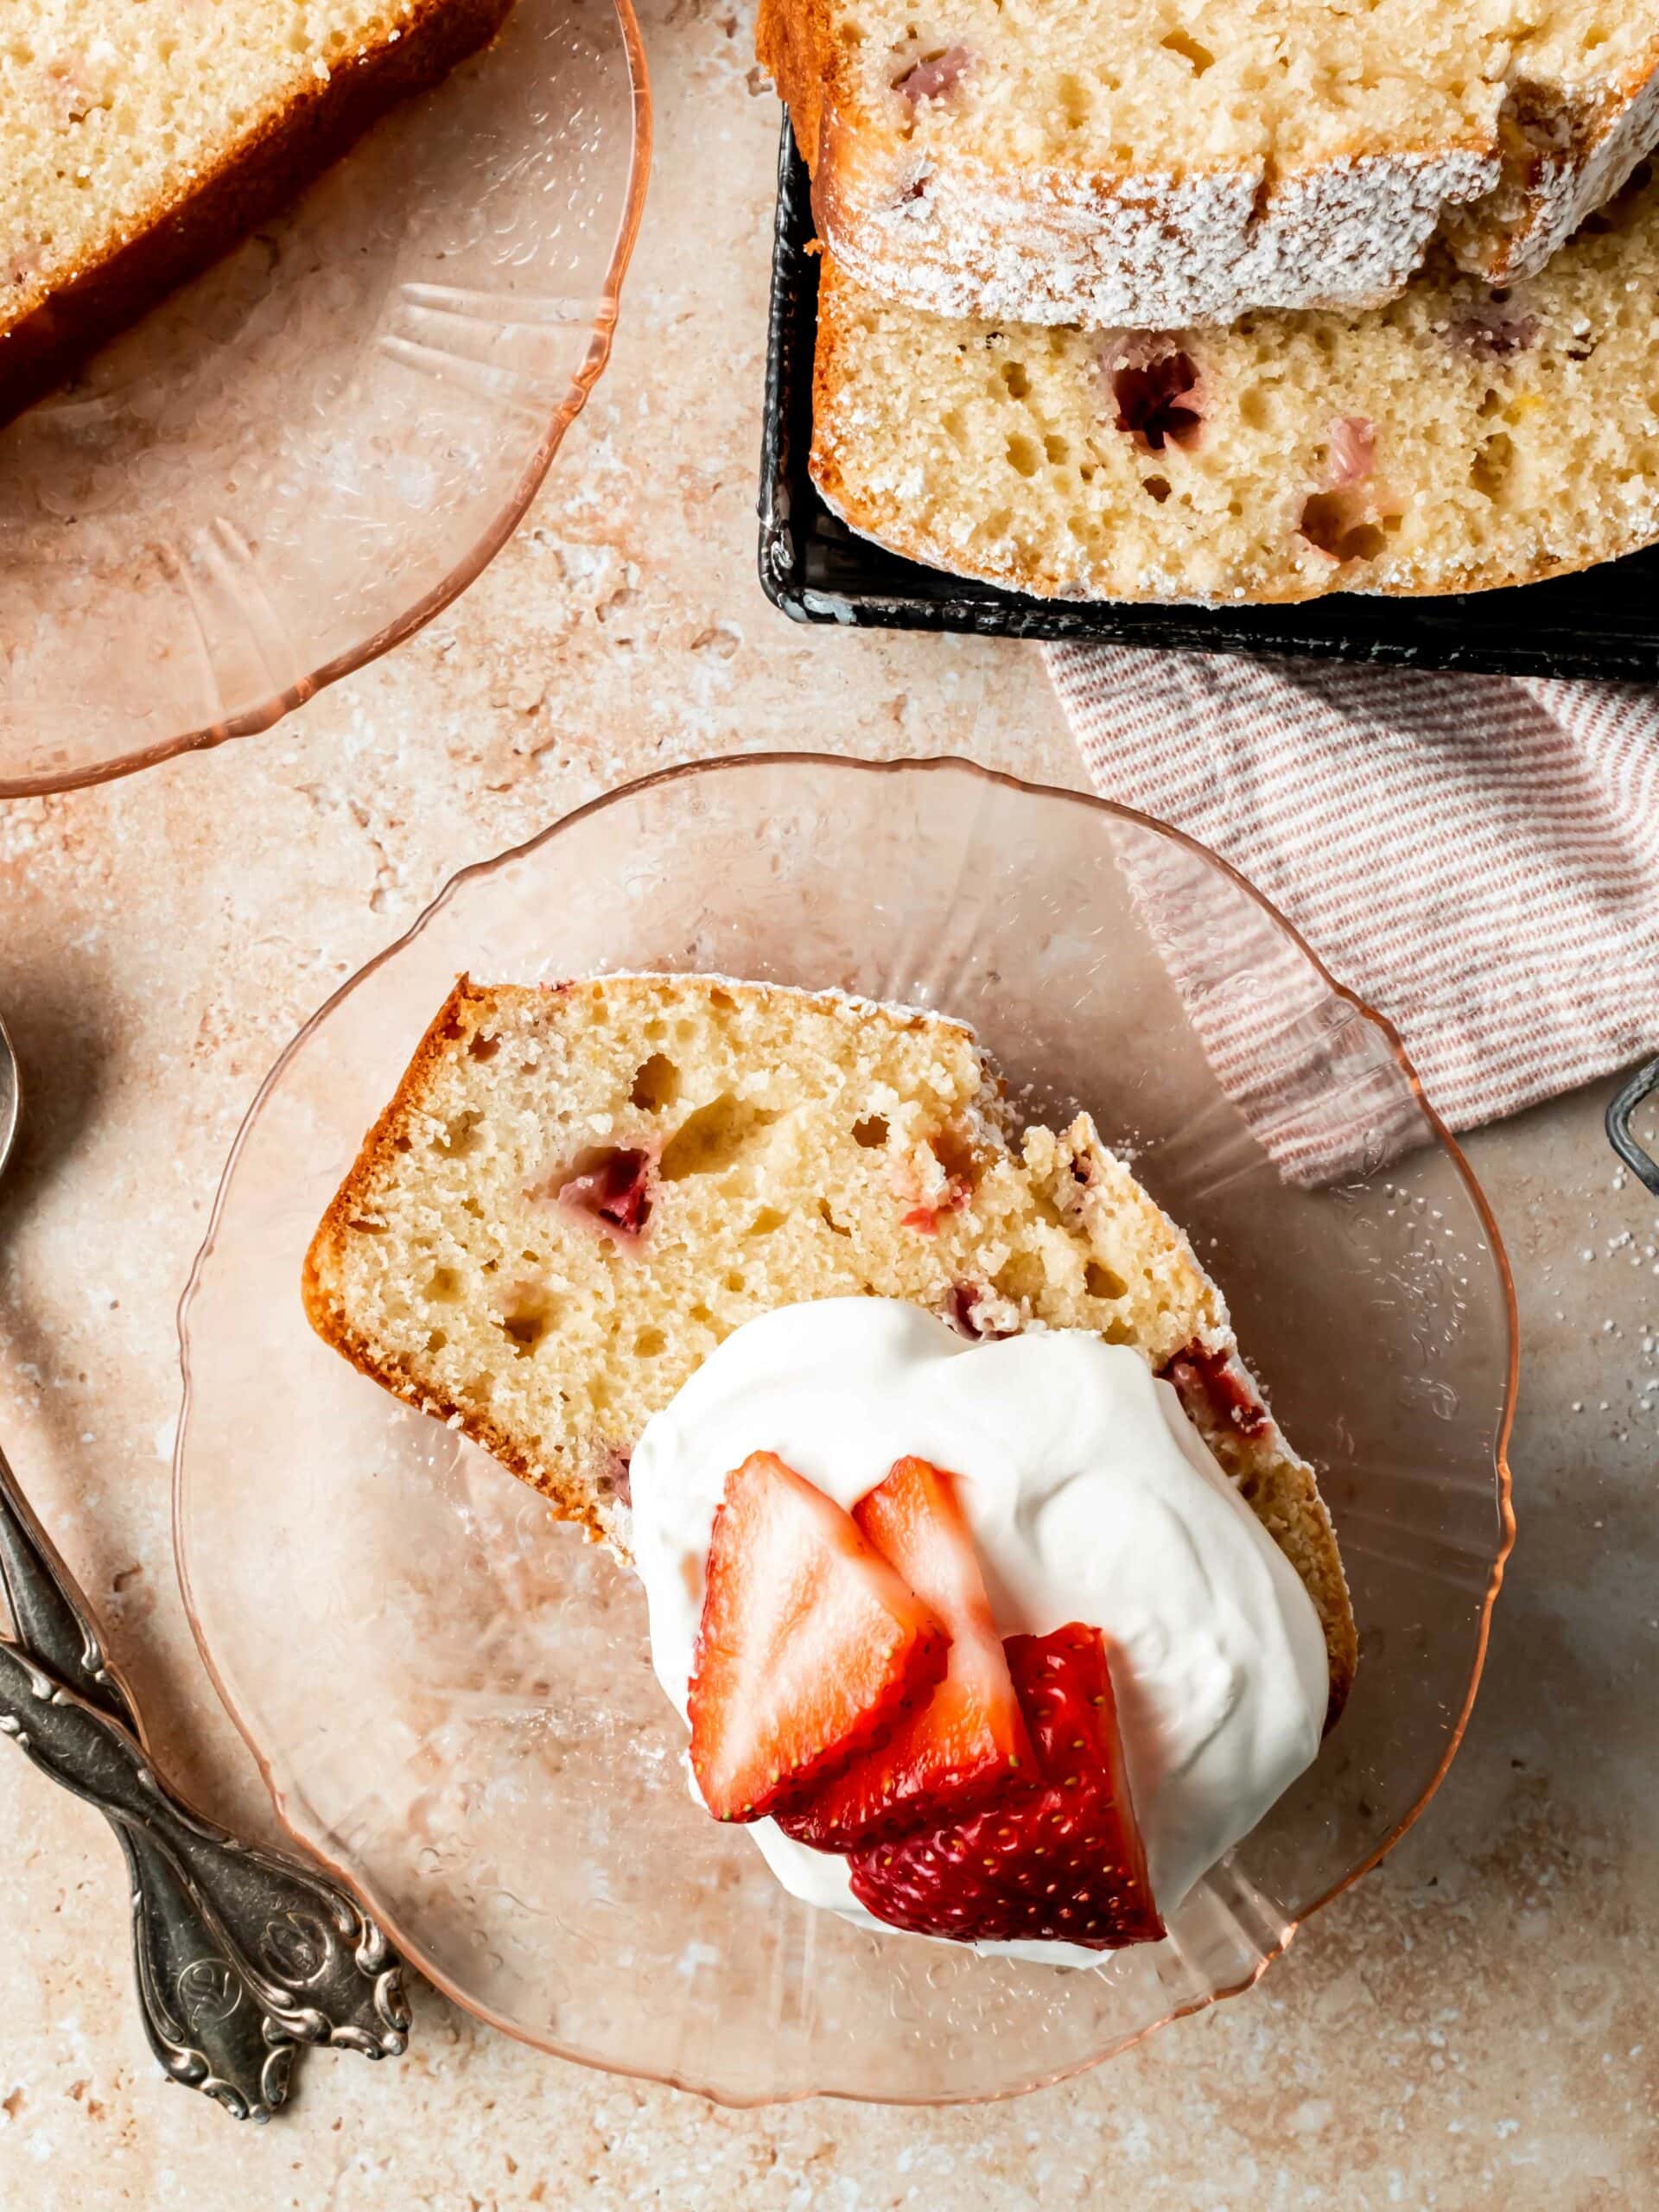 slice of pound cake on a plate with whipped cream and fresh strawberries